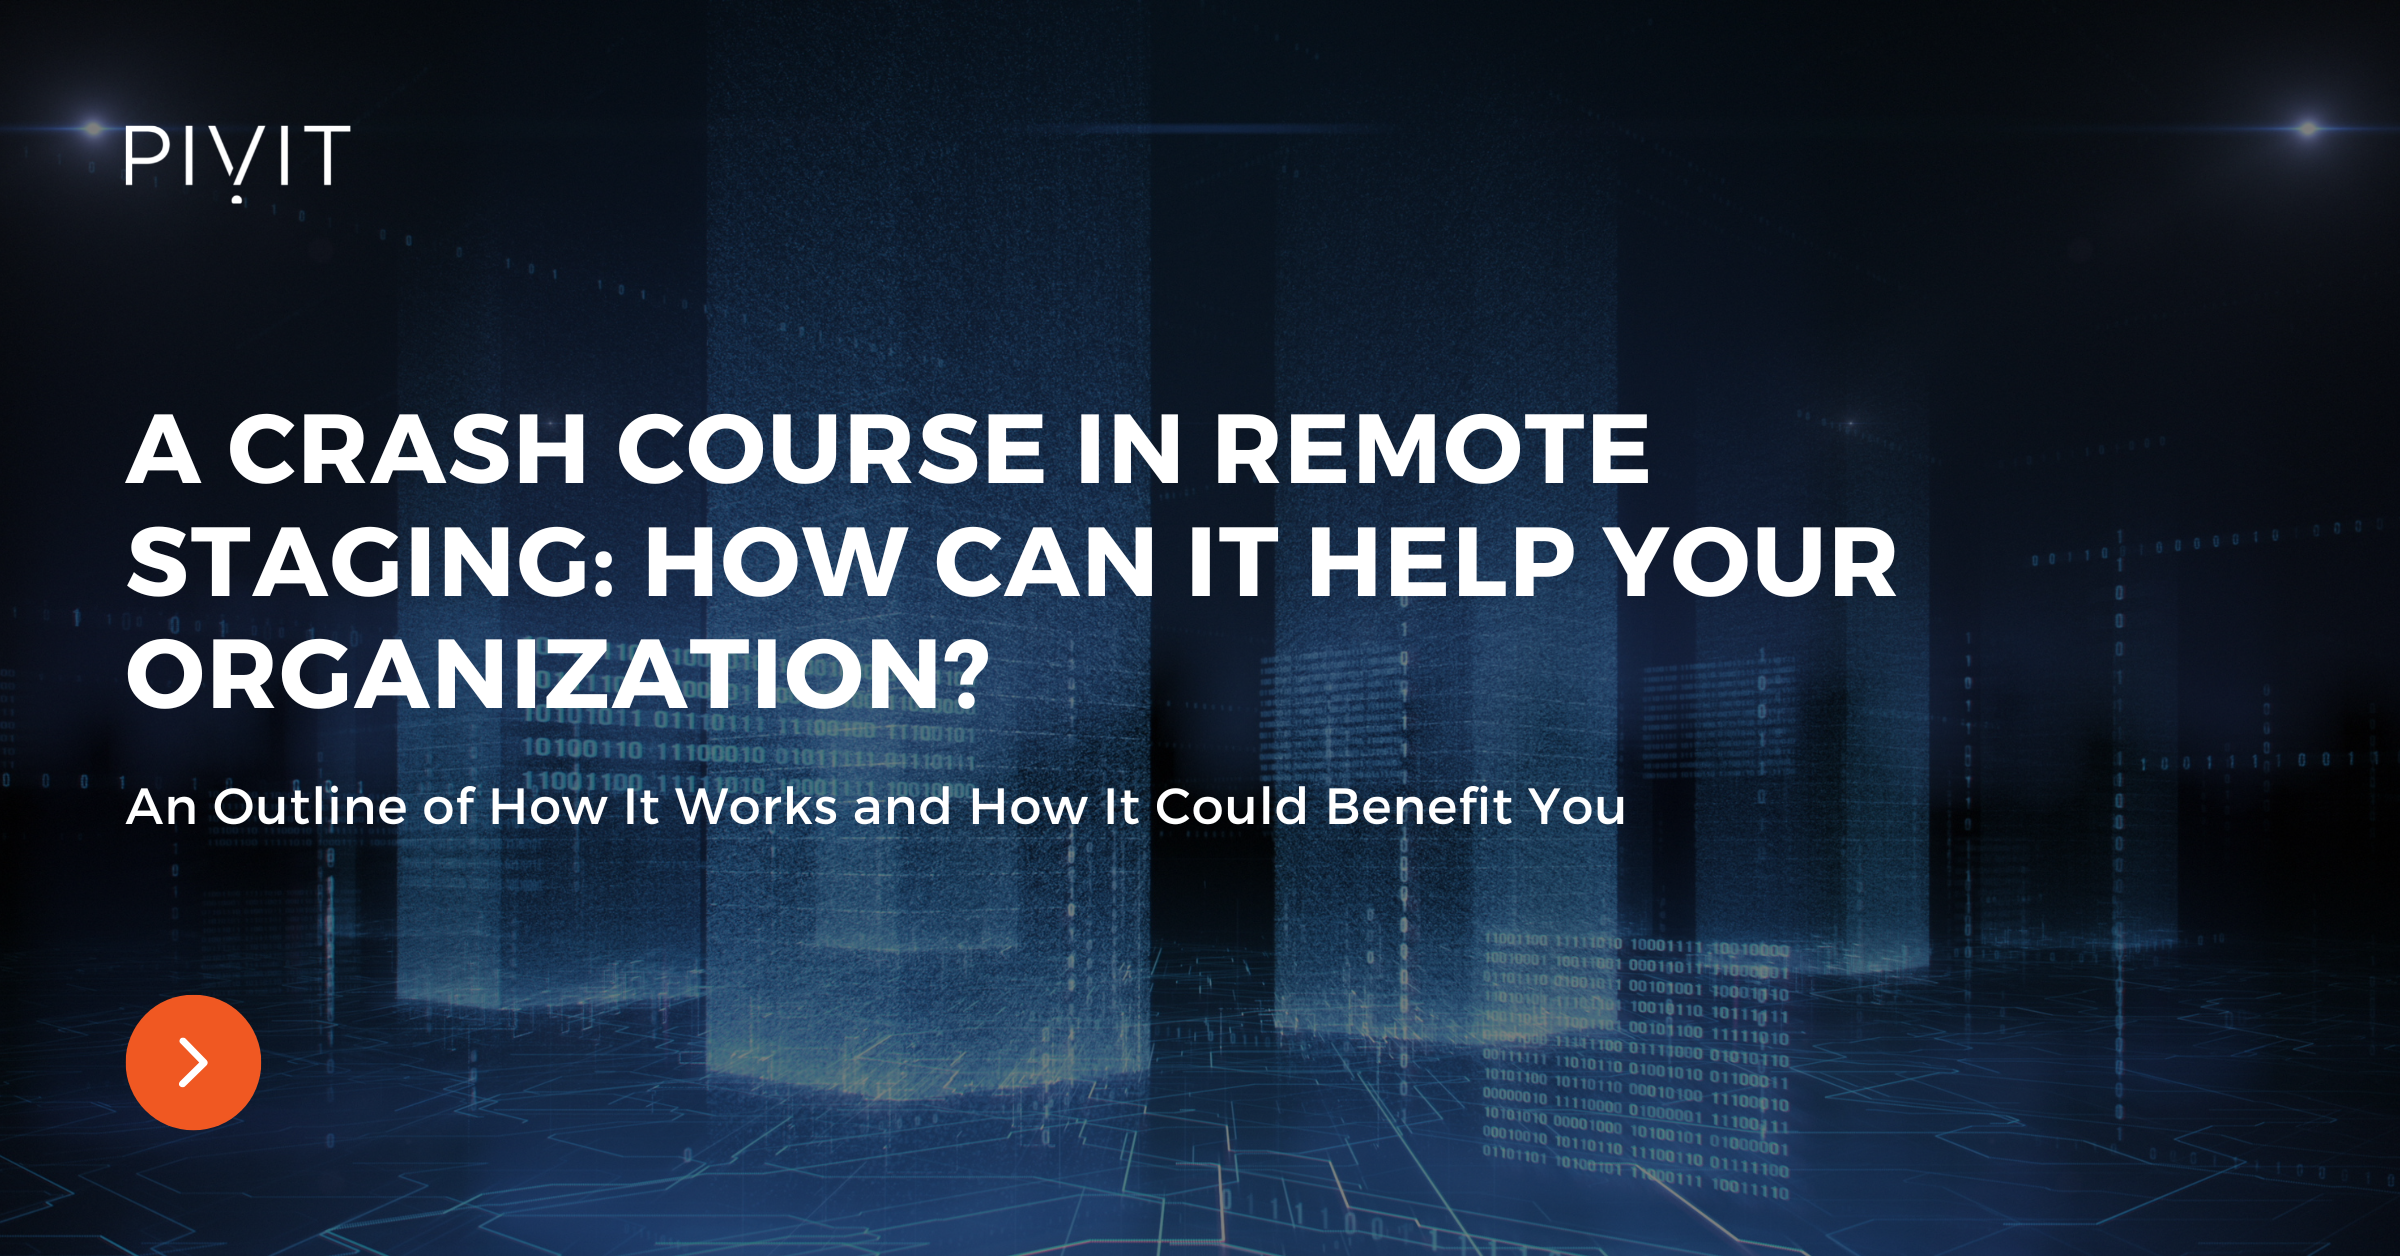 A Crash Course in Remote Staging: How Can It Help Your Organization